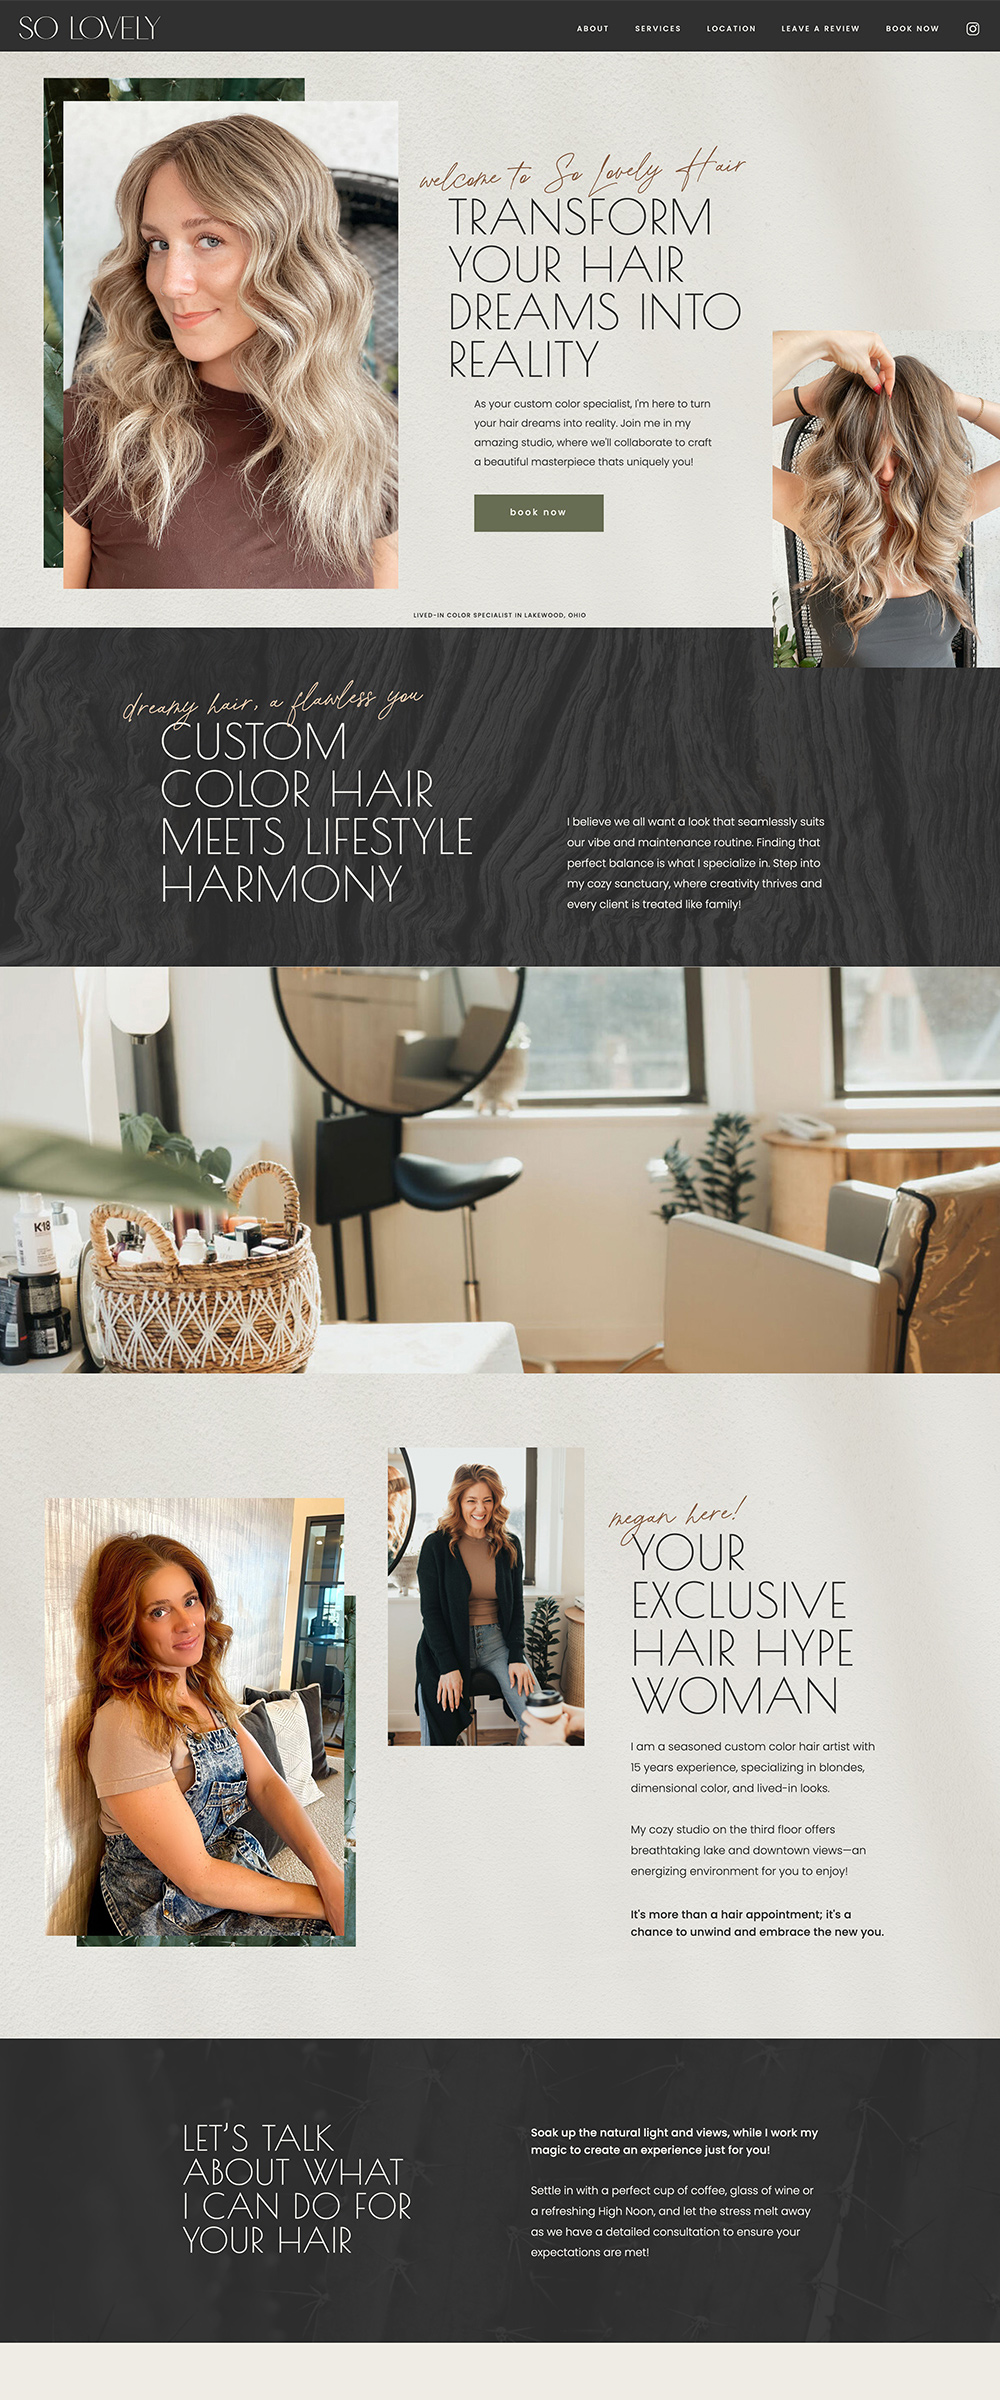 Website Design for an Independent Stylist | So Lovely Hair Design - by Hey Hello Studio